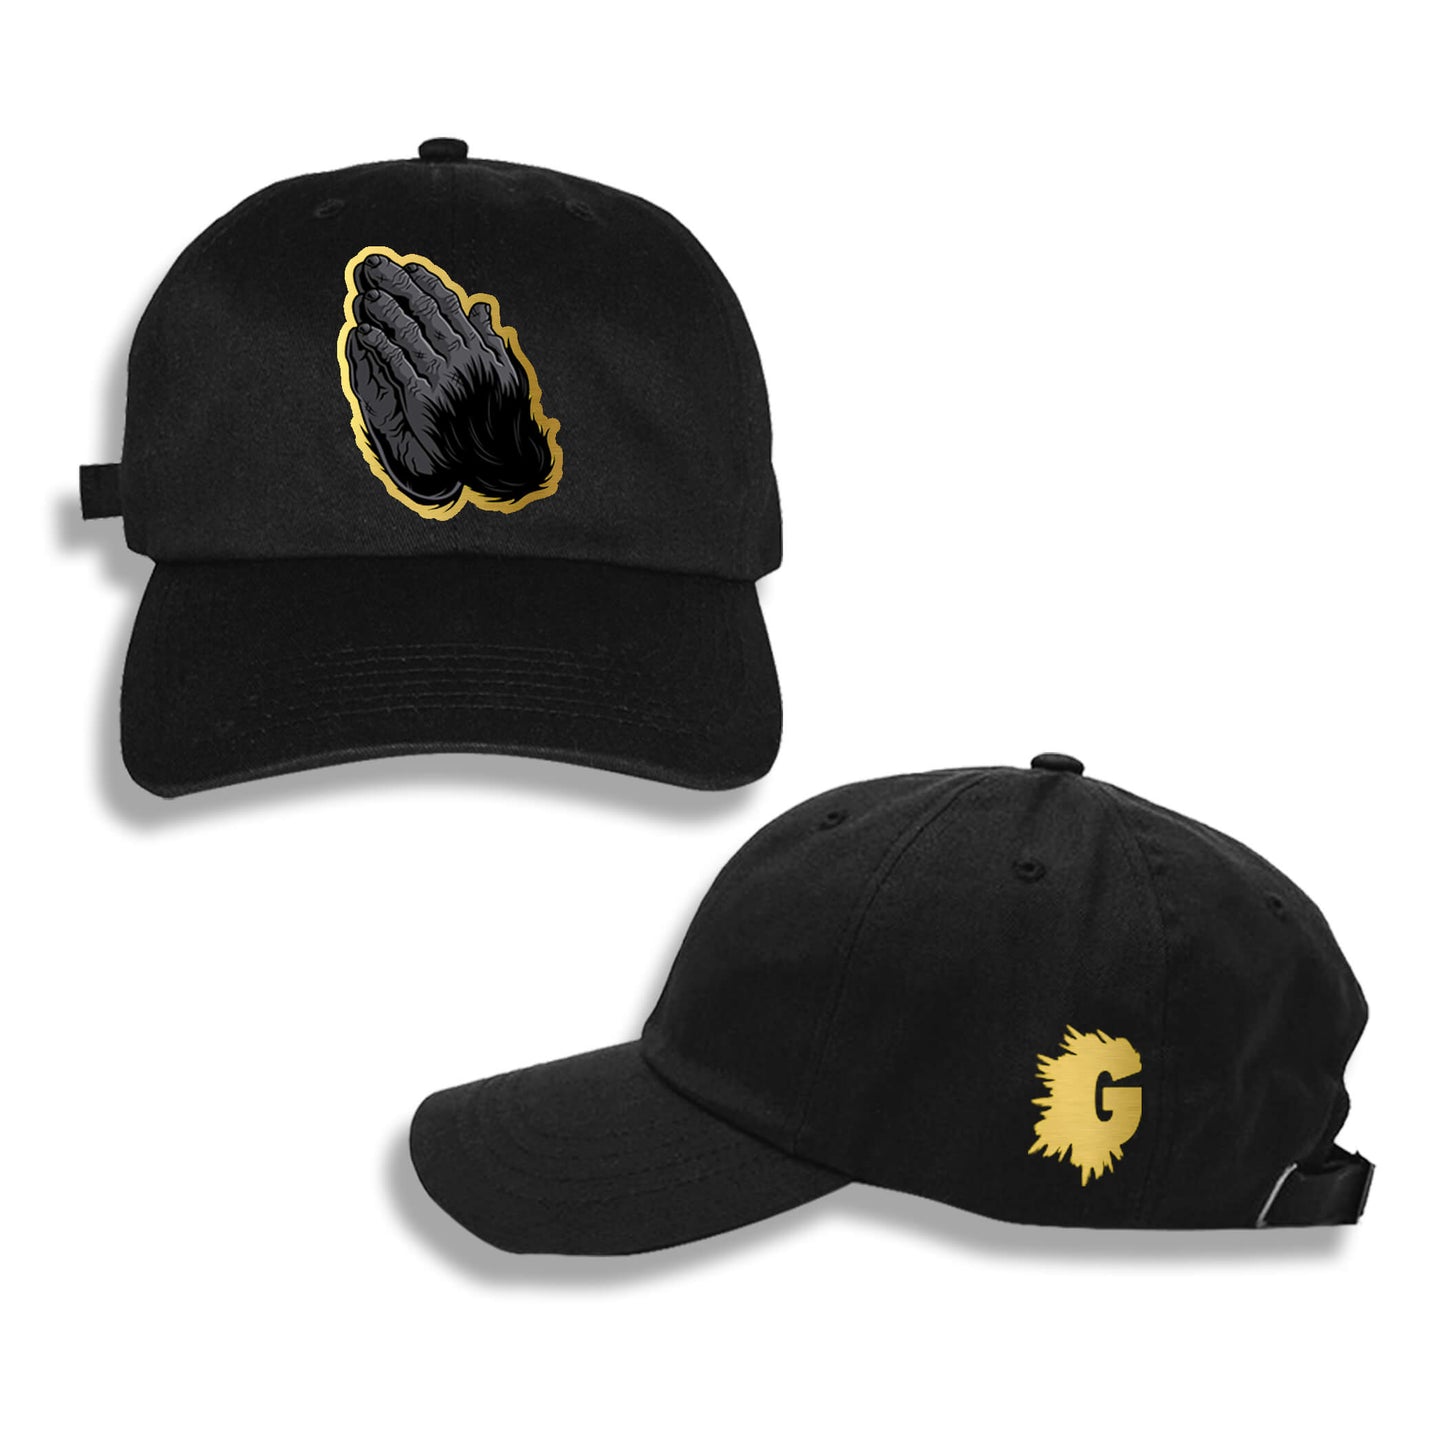 GOD BLESS THE GORILLAS DAD HAT (MULTIPLE COLORWAYS)